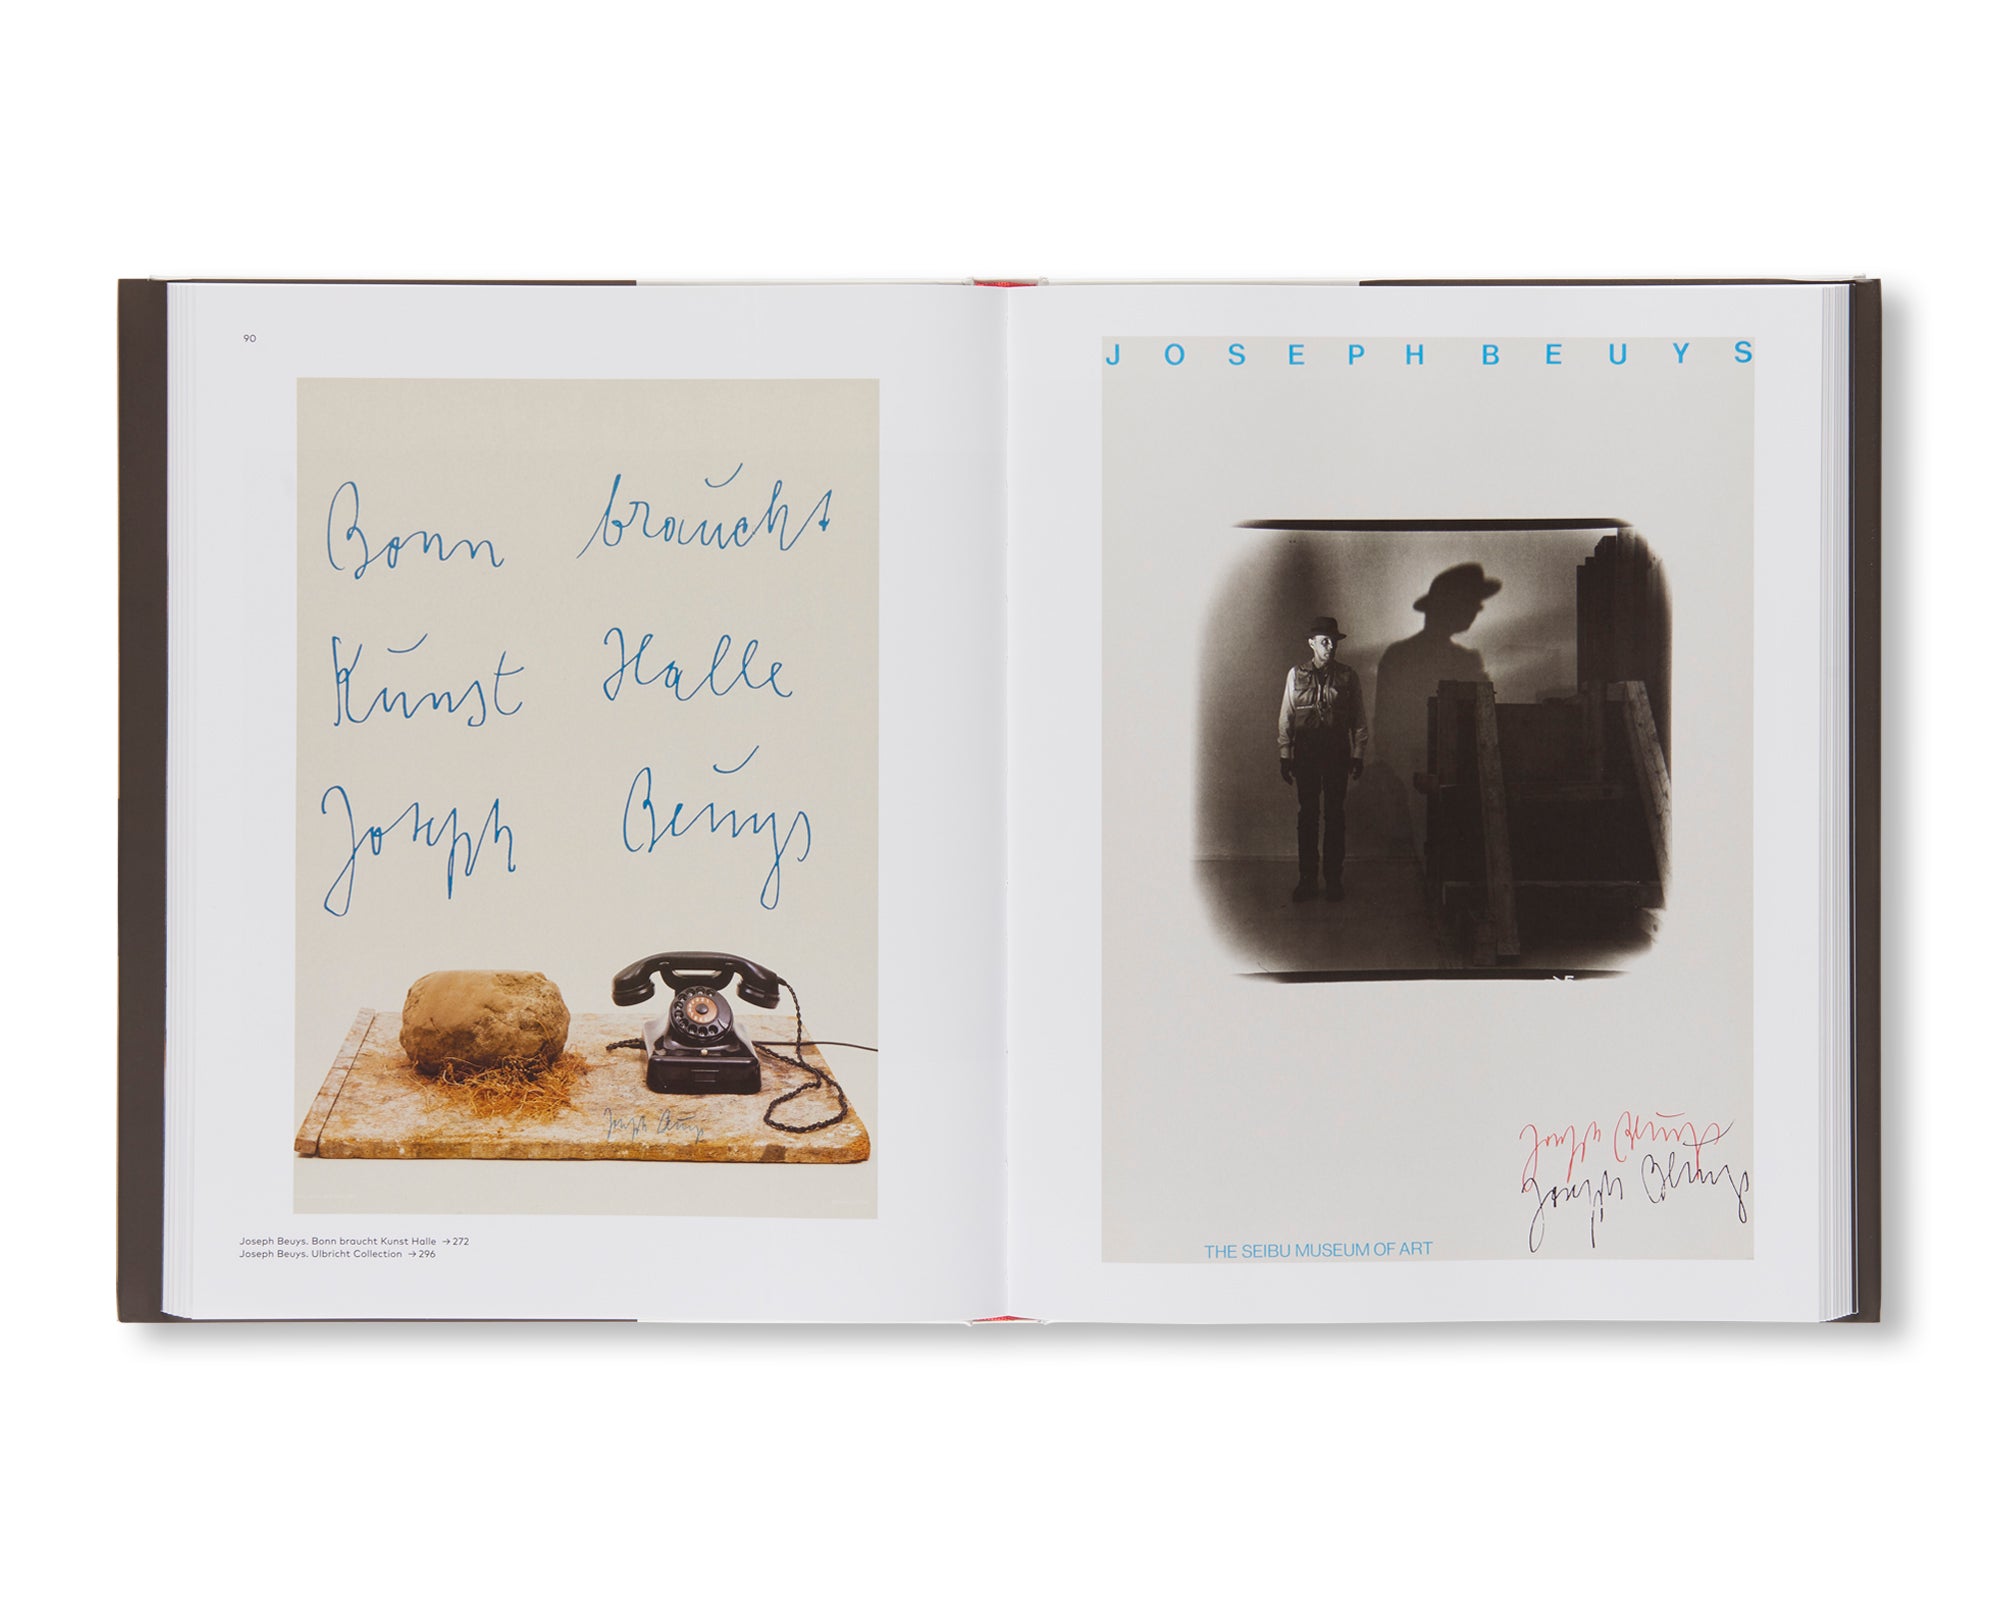 POSTERS by Joseph Beuys